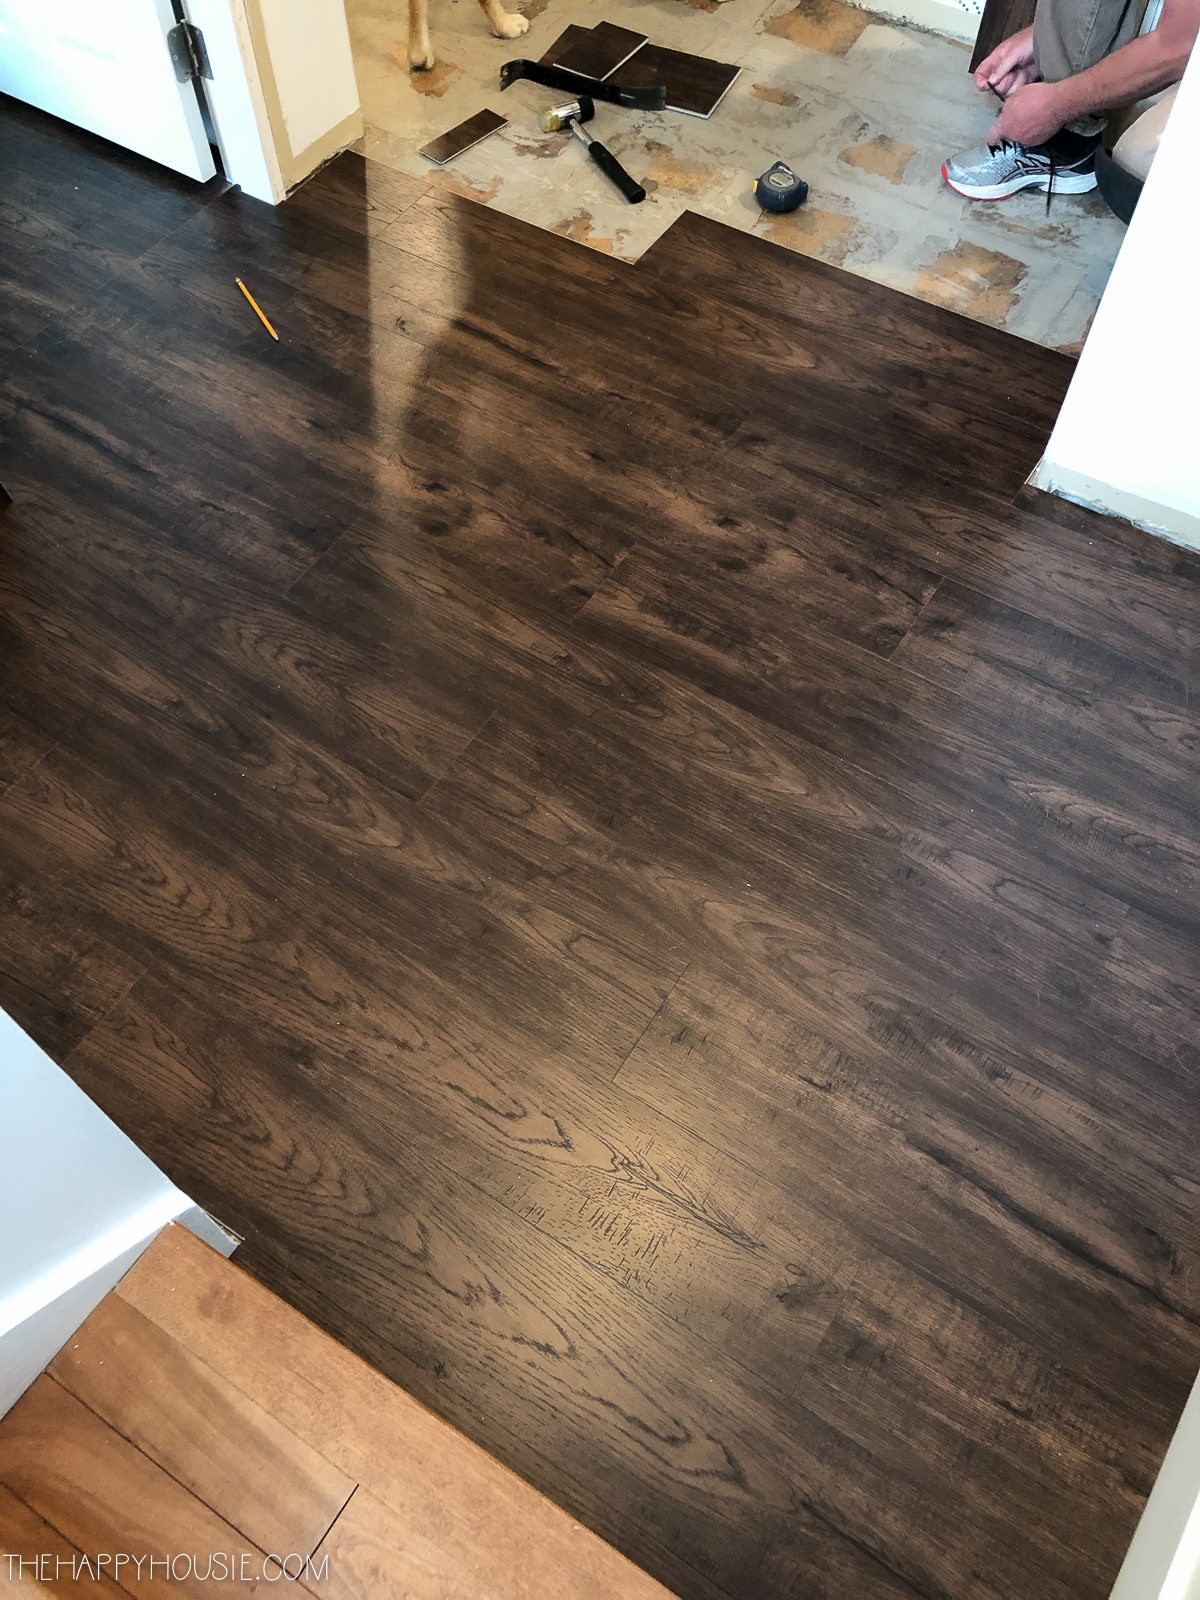 To Install Vinyl Plank Over Tile Floors, Can You Install Vinyl Flooring Over Tile